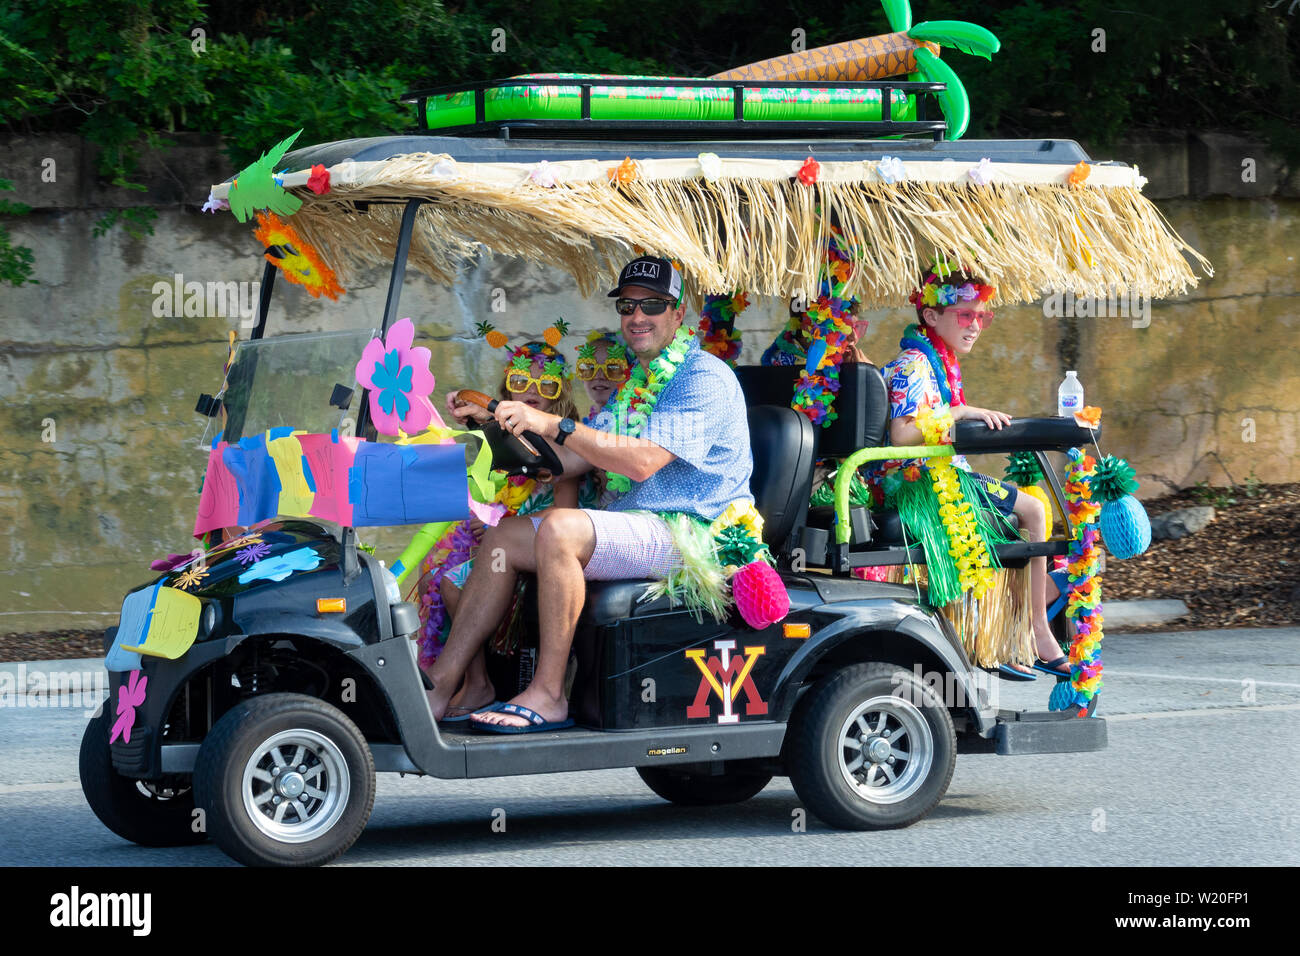 A golf cart float decorated in beach themes during the annual Independence Day golf cart and bicycle parade July 4, 2019 in Sullivan's Island, South Carolina. The tiny affluent Sea Island beach community across from Charleston holds an outsized golf cart parade featuring more than 75 decorated carts. Stock Photo